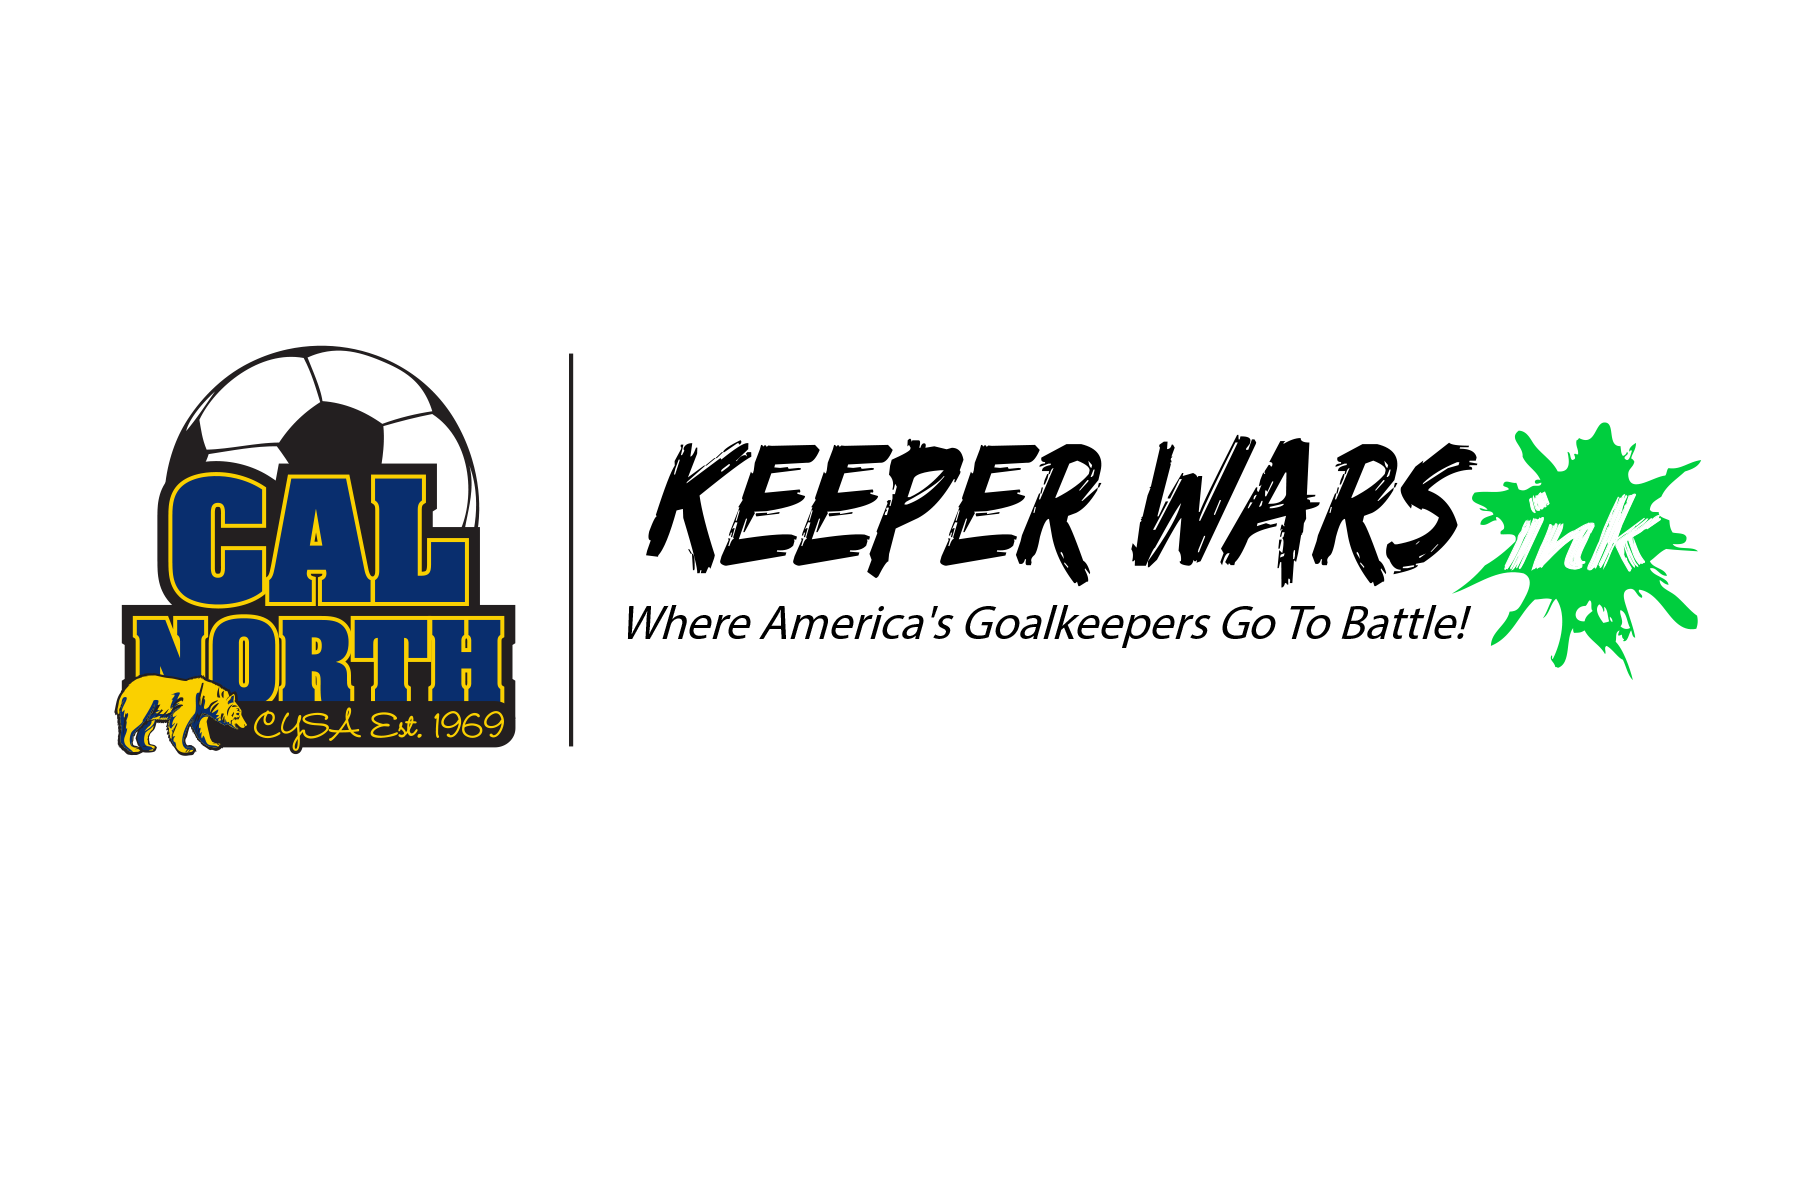 Event Keeper Wars Ink Tournament Labor Day Weekend